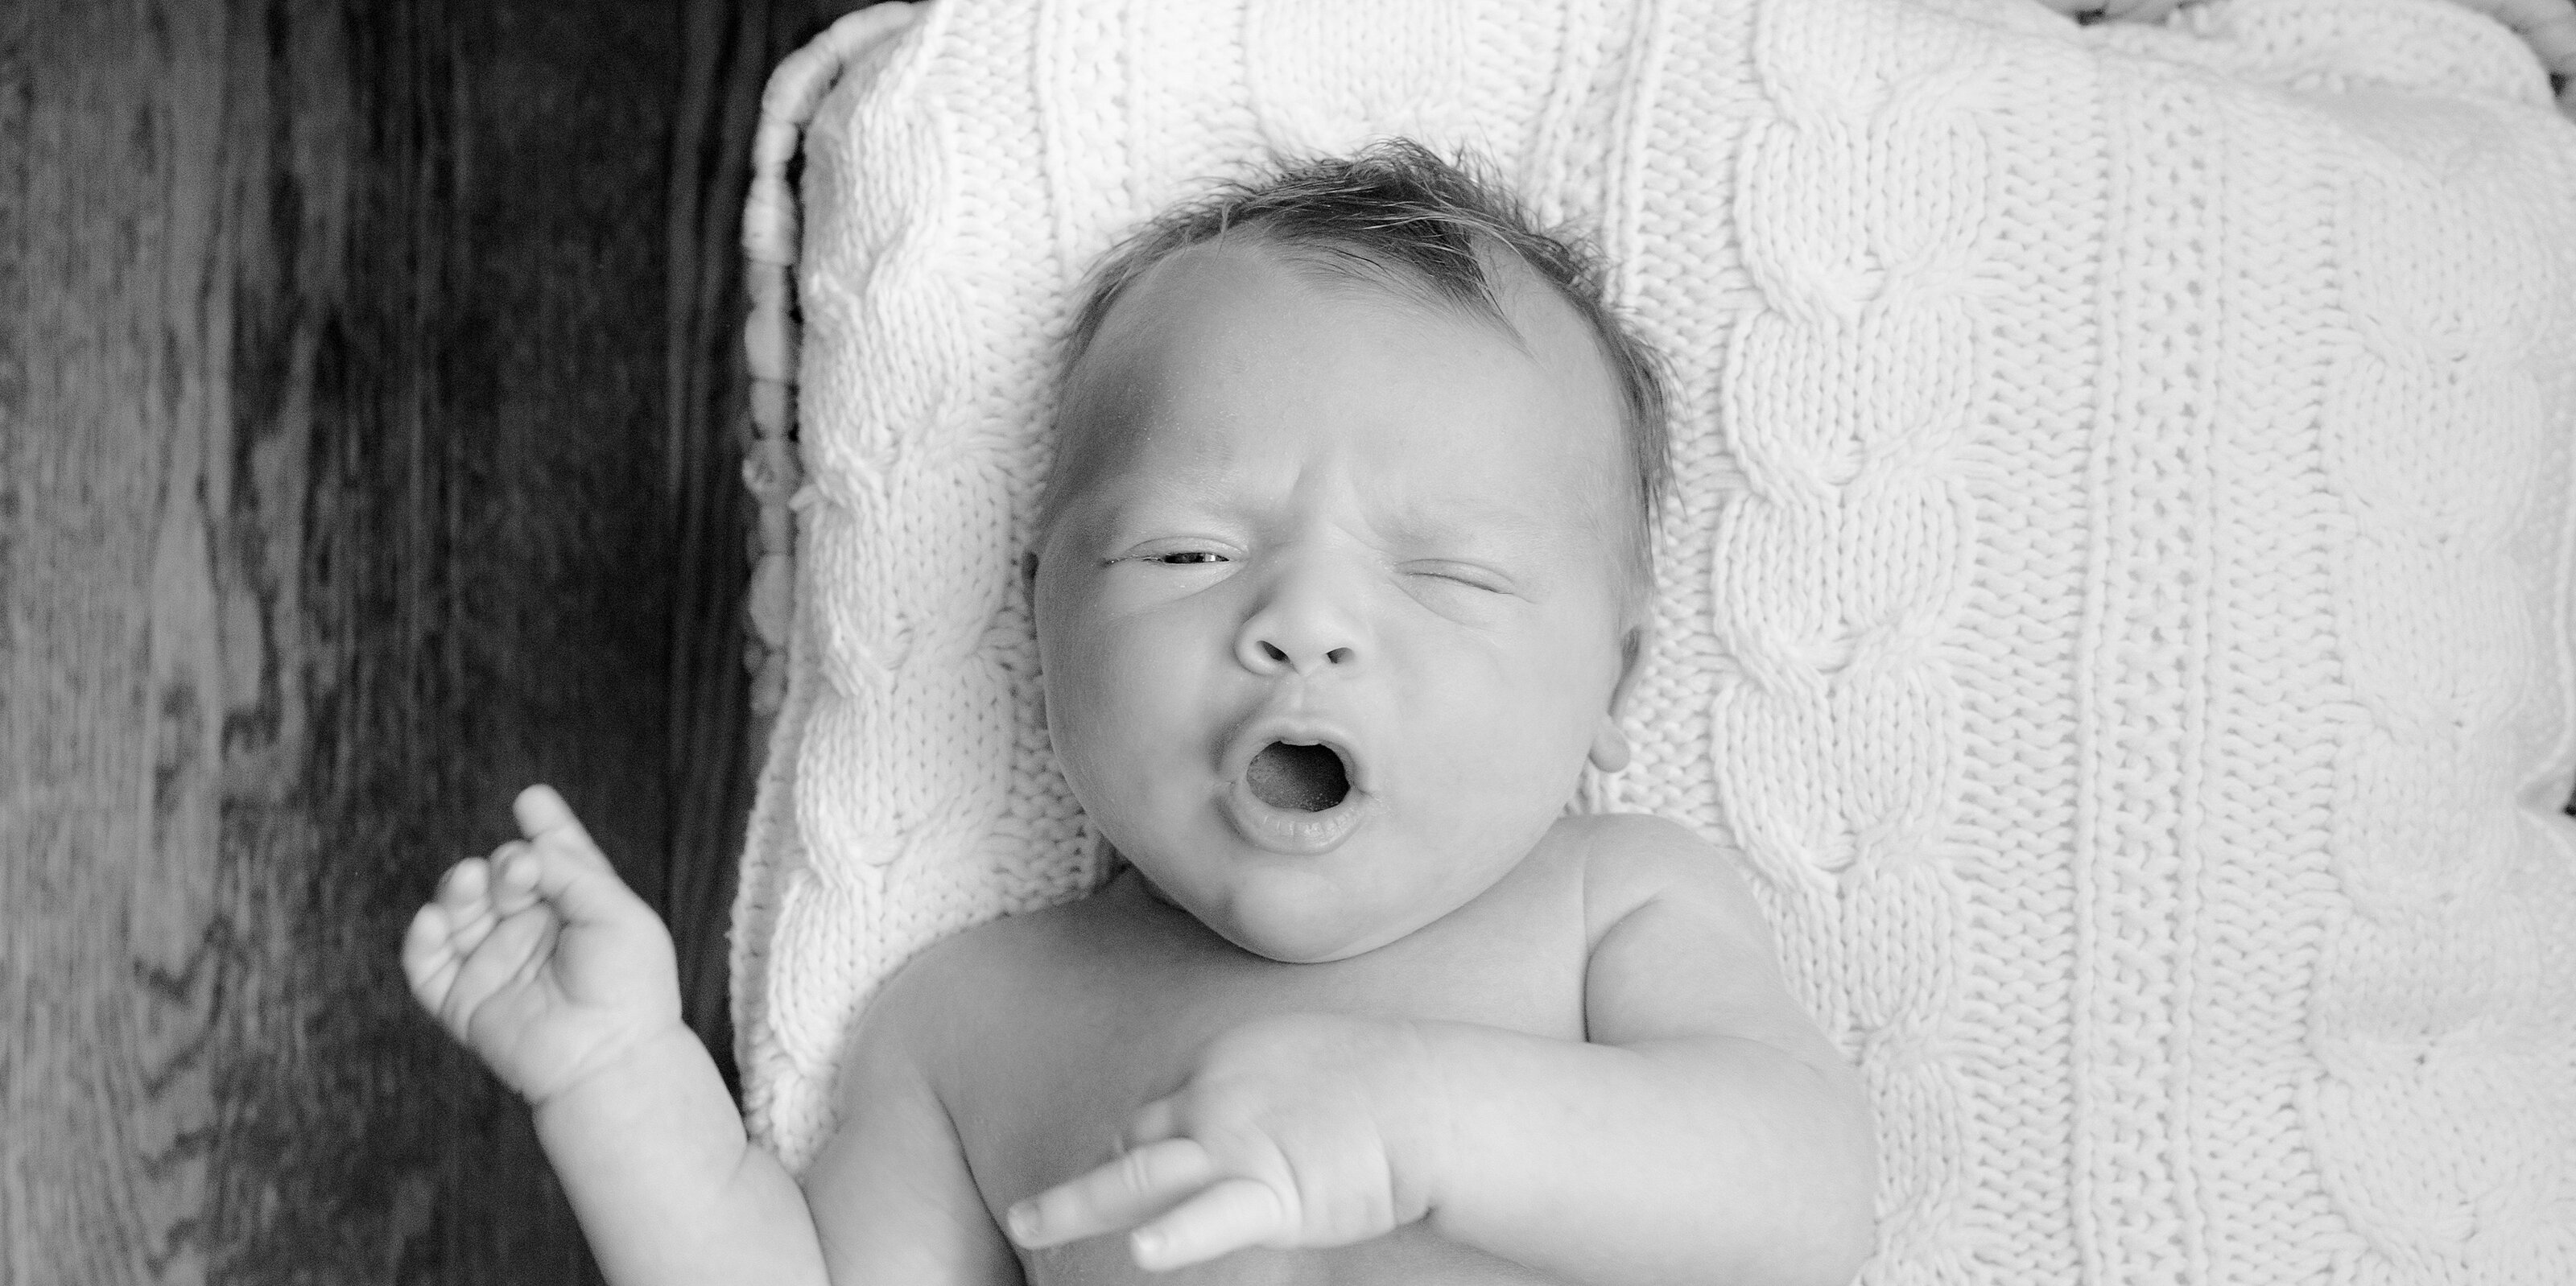 15_newborn-boy-makes-funny-faces-while-sleeping